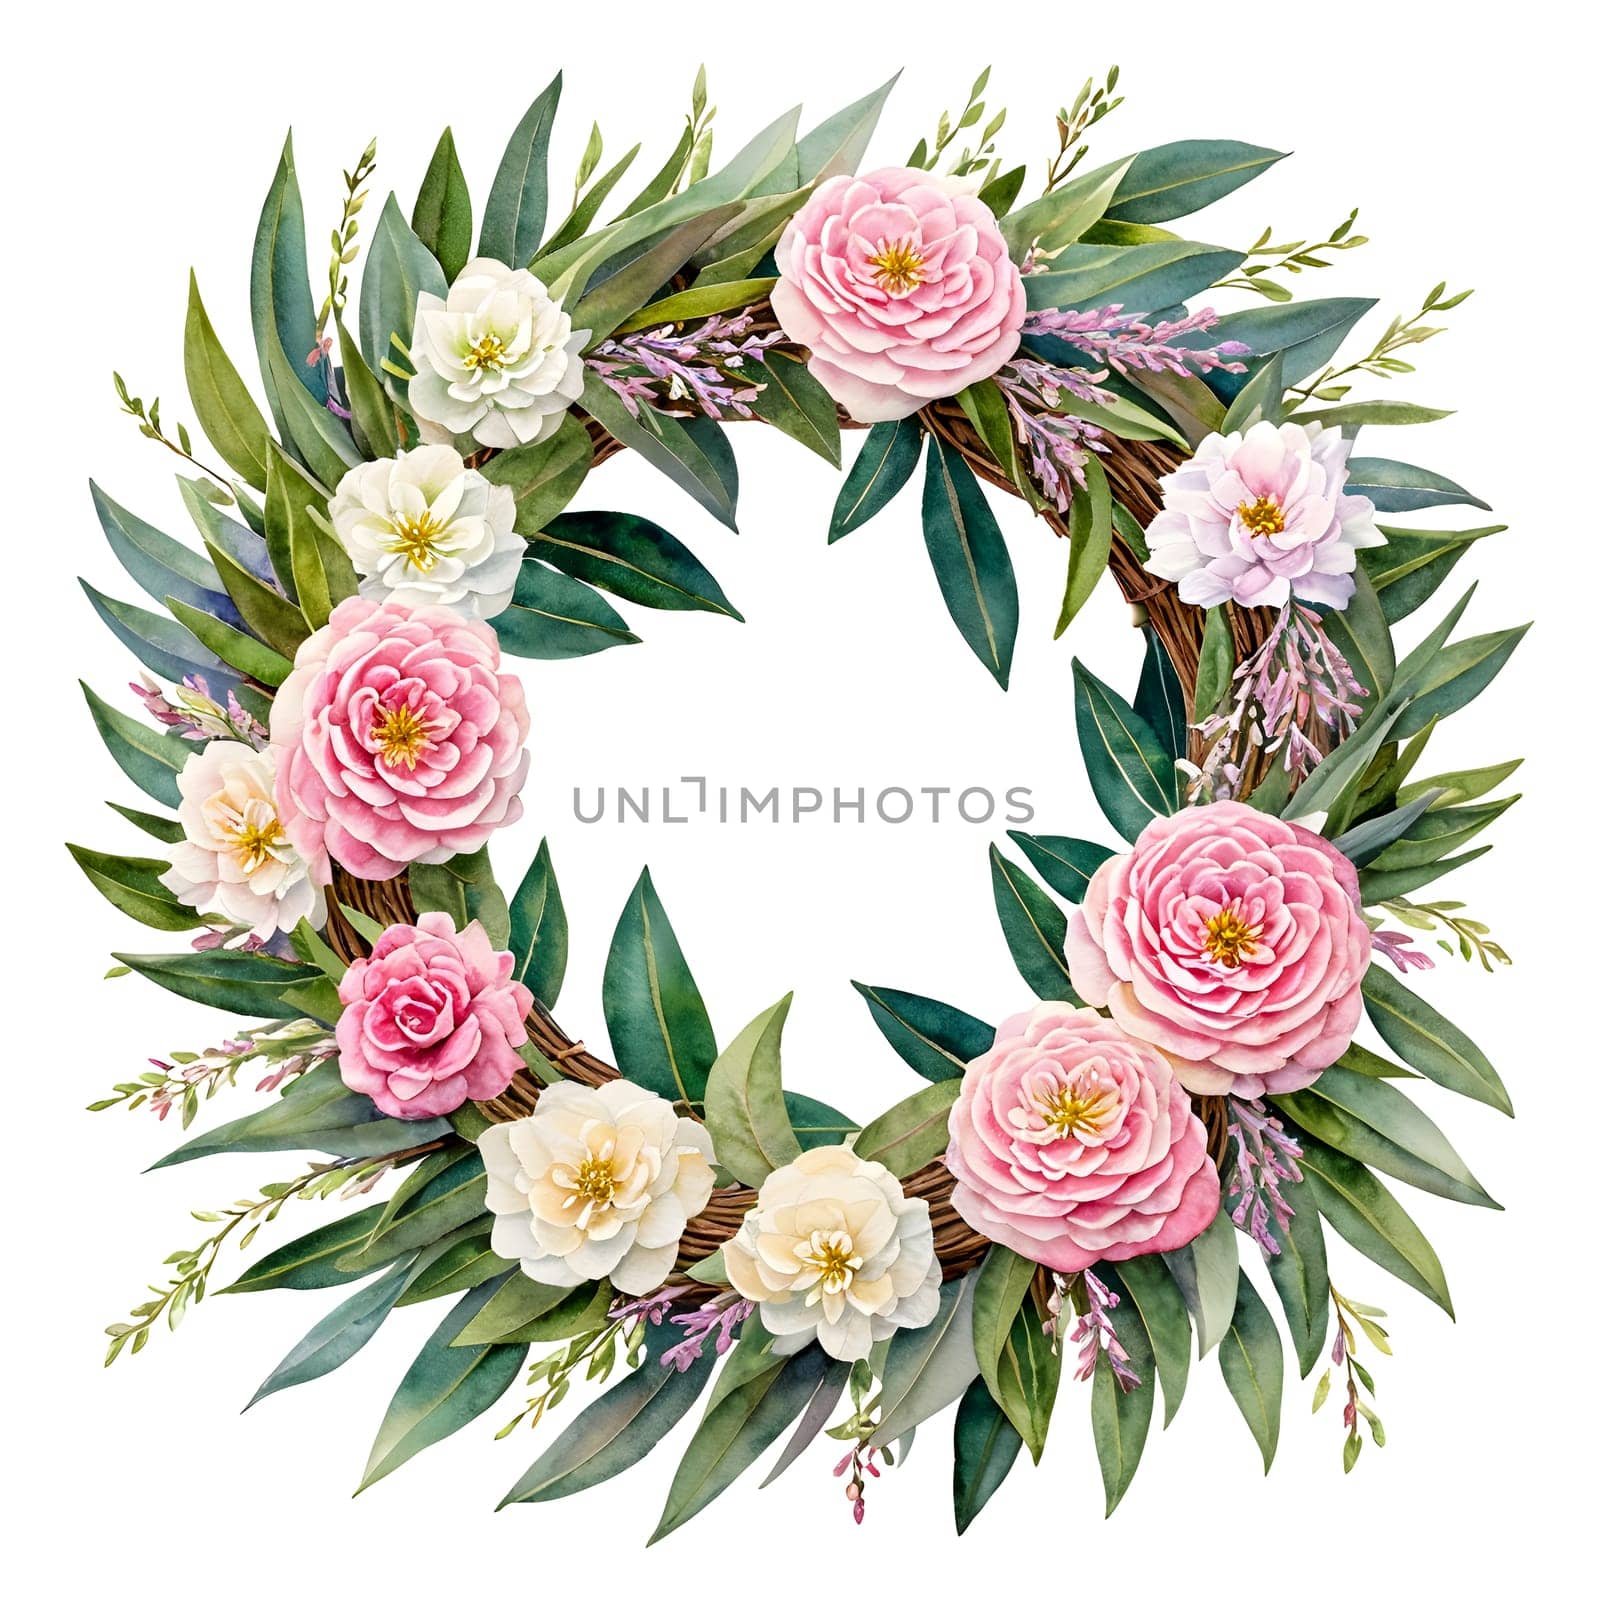 Watercolor Floral Wreath with Pink and White Flowers and Leaves on White Background. by LanaLeta